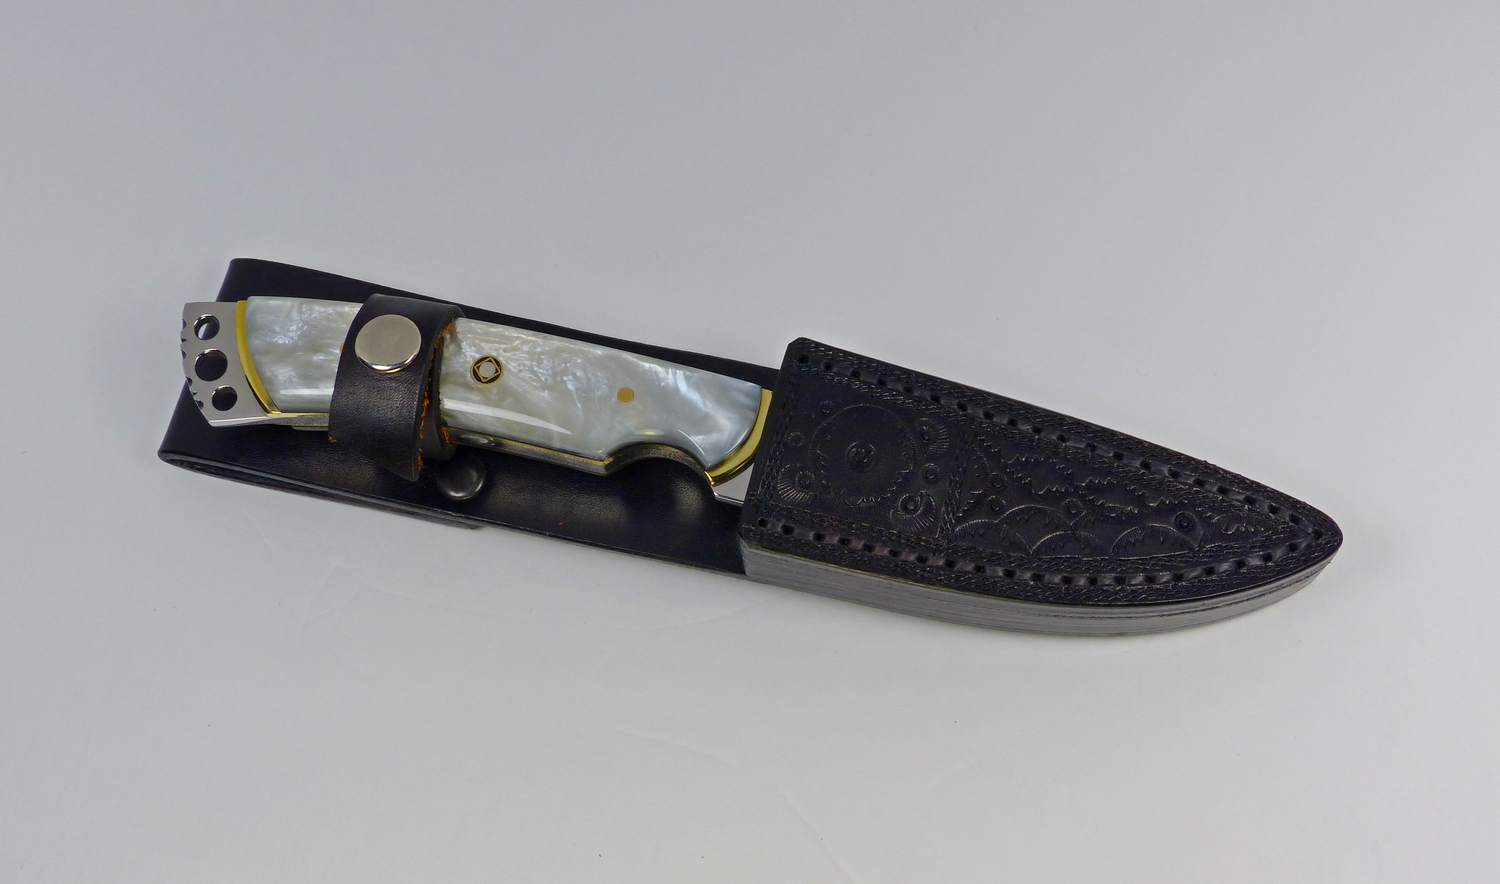 Art knife inside matching, handcrafted black leather sheath - S18